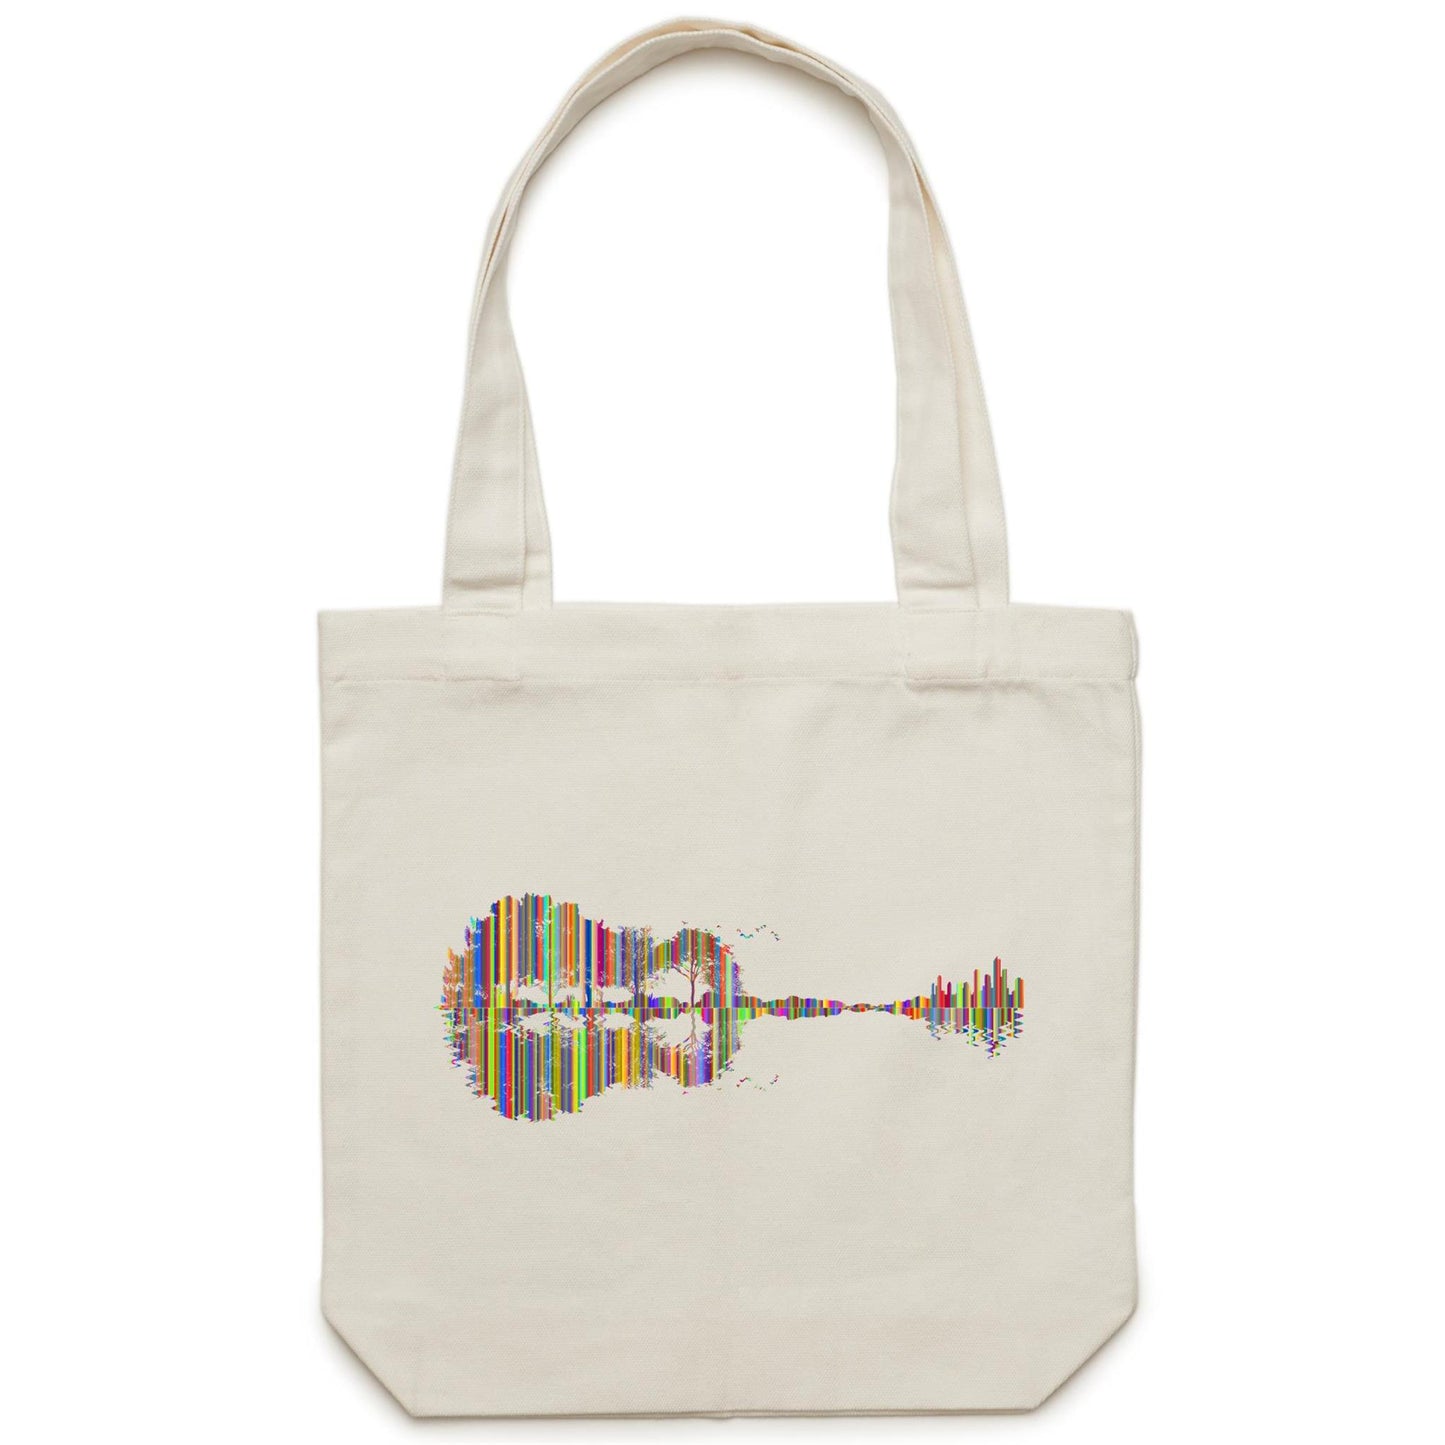 Guitar Reflection In Colour - Canvas Tote Bag Cream One Size Tote Bag Music